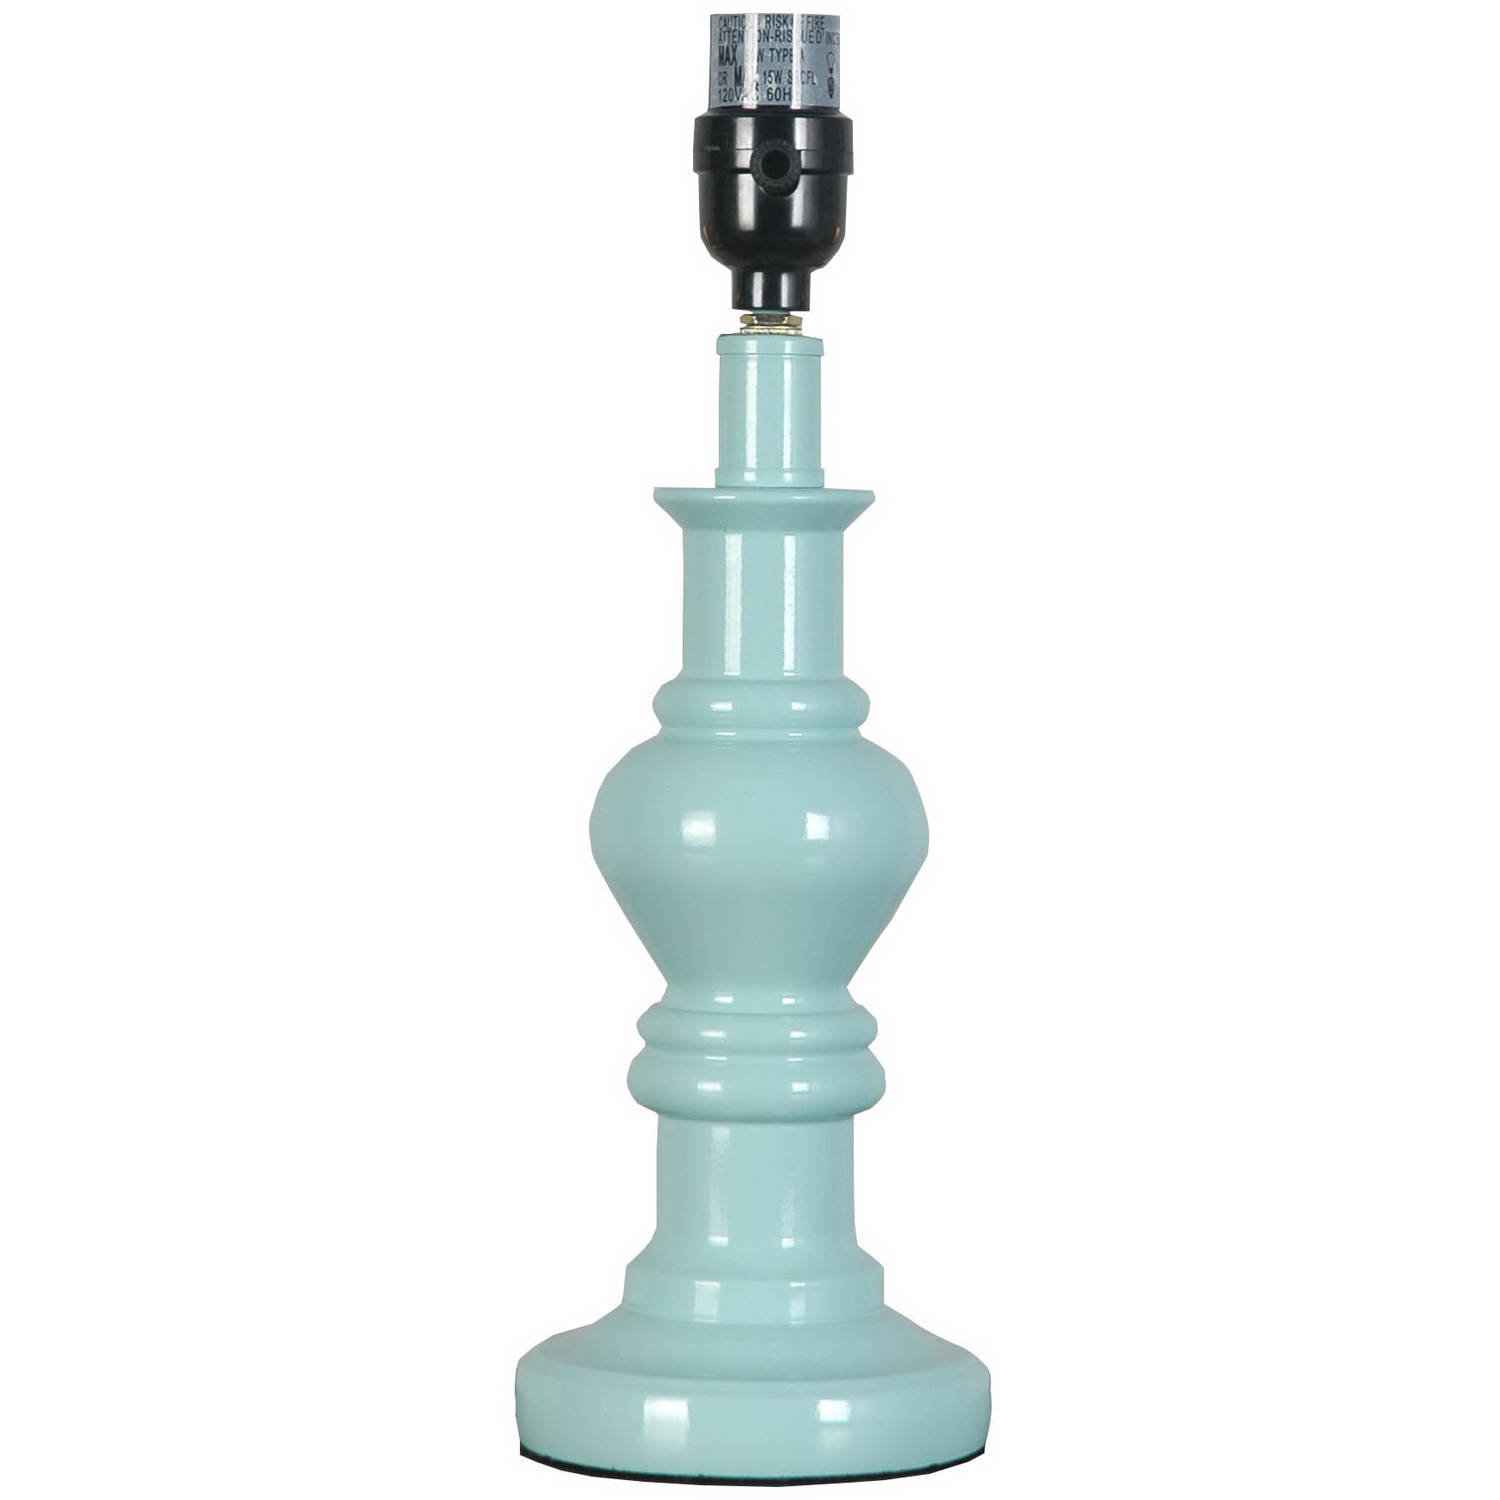 Better Homes & Gardens Turned Accent Lamp Base, Teal - image 1 of 10